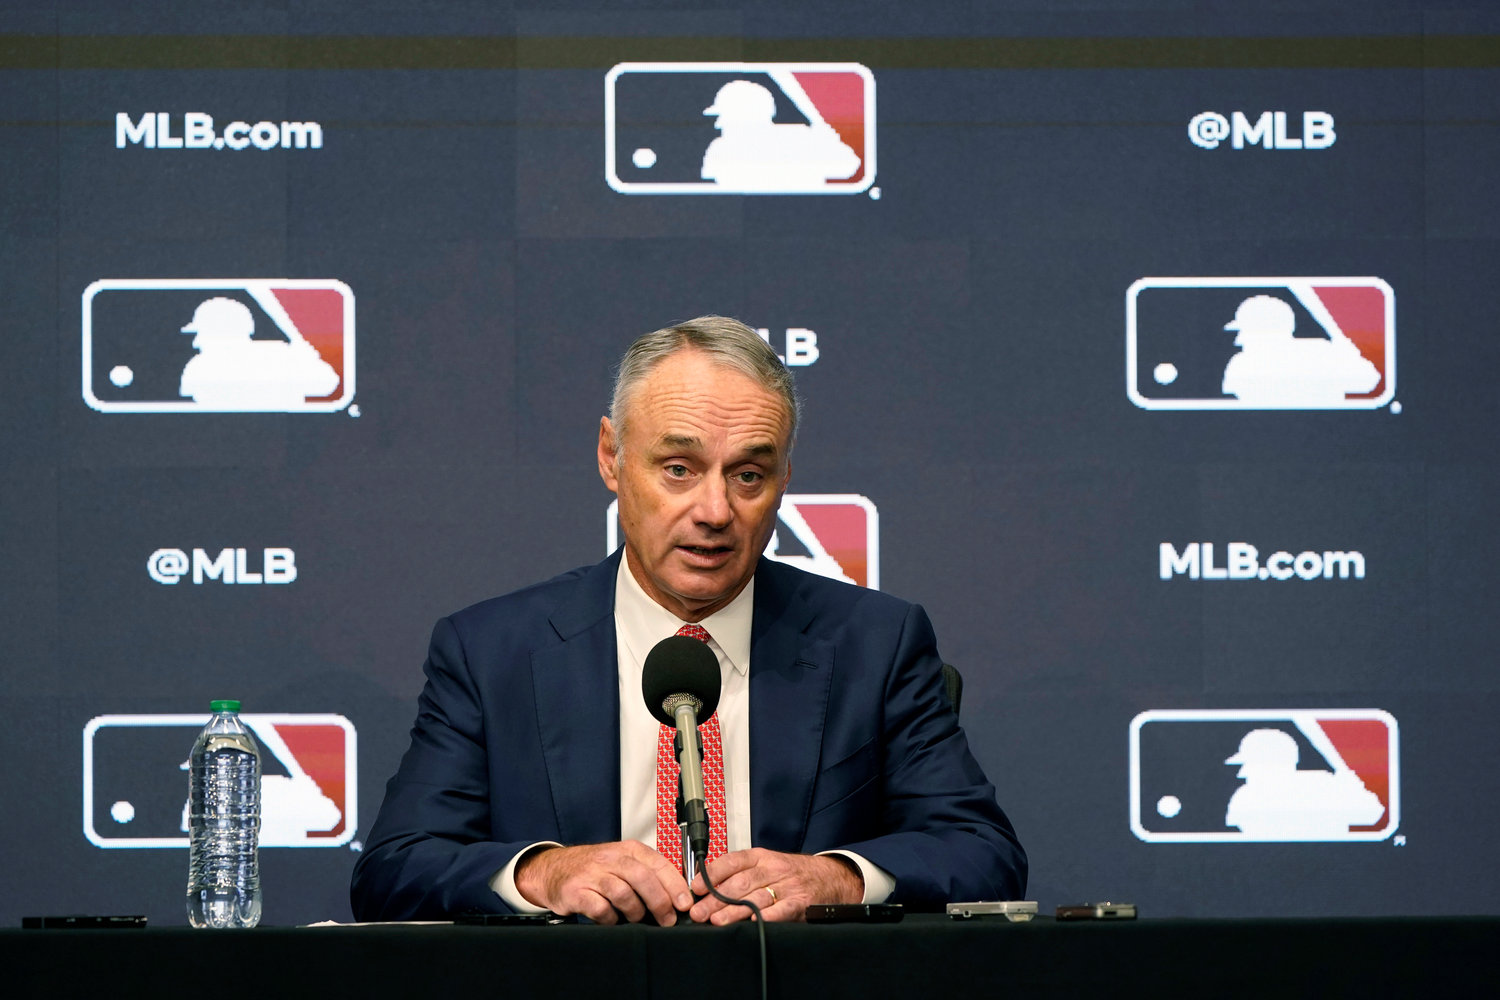 FILE - Major League Baseball commissioner Rob Manfred speaks during a news conference in Arlington, Texas, Thursday, Dec. 2, 2021. Major League Baseball and the players‚Äô association are scheduled to meet Thursday, Jan. 13, 2022, in the first negotiations between the parties since labor talks broke off Dec. 1. The planning of the meeting was disclosed to The Associated Press by a person familiar with the negotiations who spoke on condition of anonymity because no announcement was made. (AP Photo/LM Otero, File)